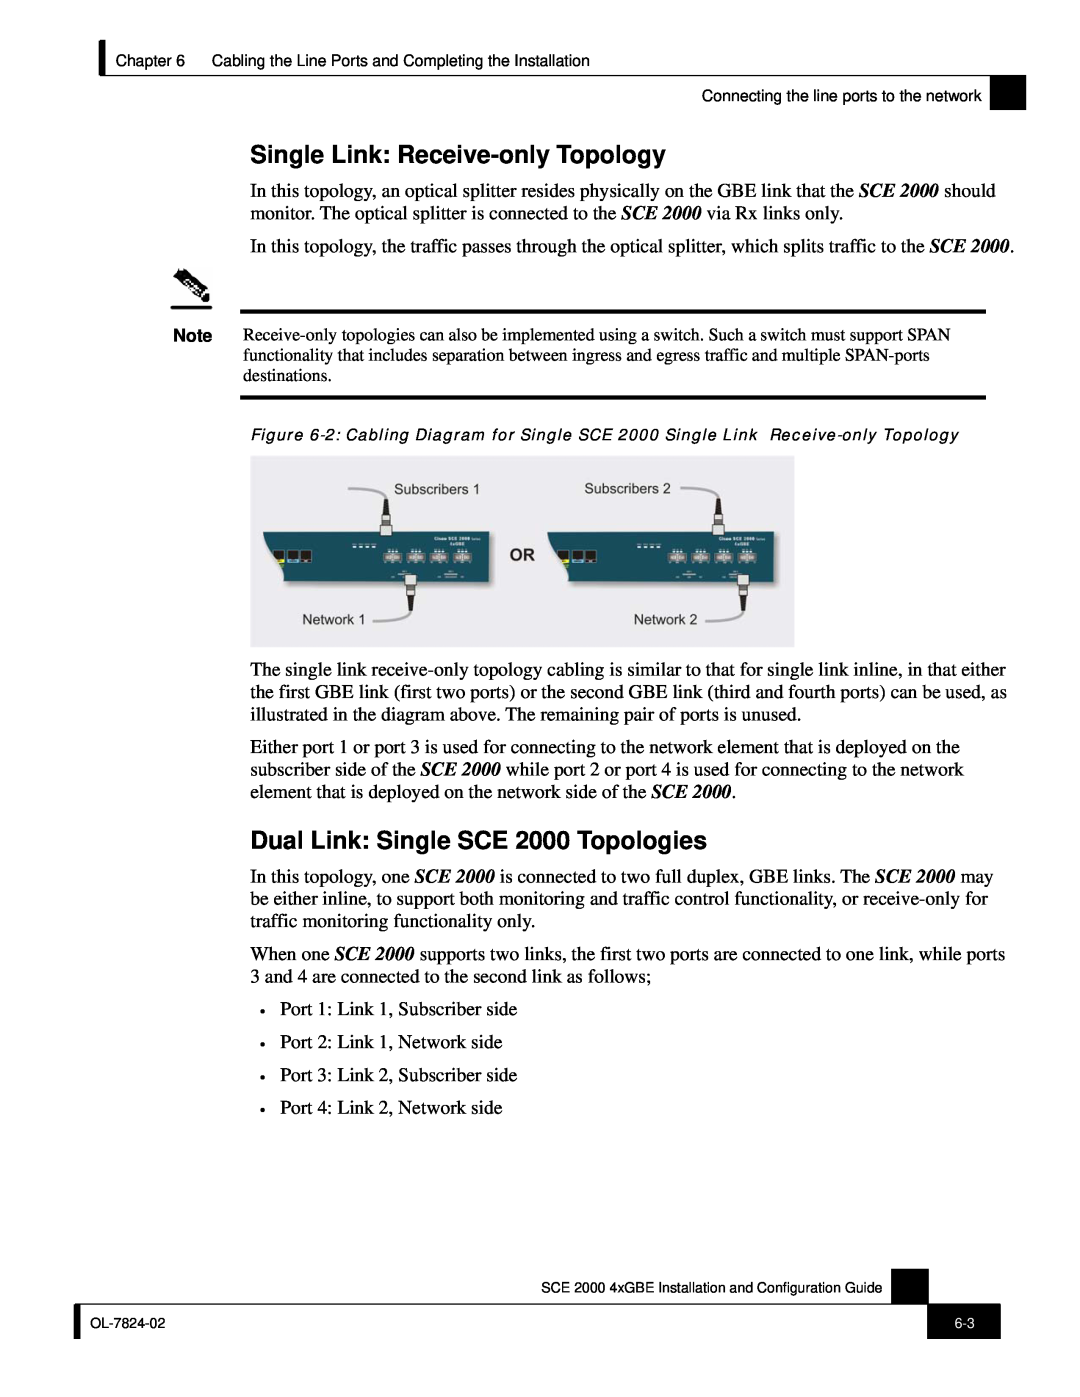 Cisco Systems SCE 2000 4xGBE manual Dual Link Single SCE 2000 Topologies, Single Link Receive-only Topology 